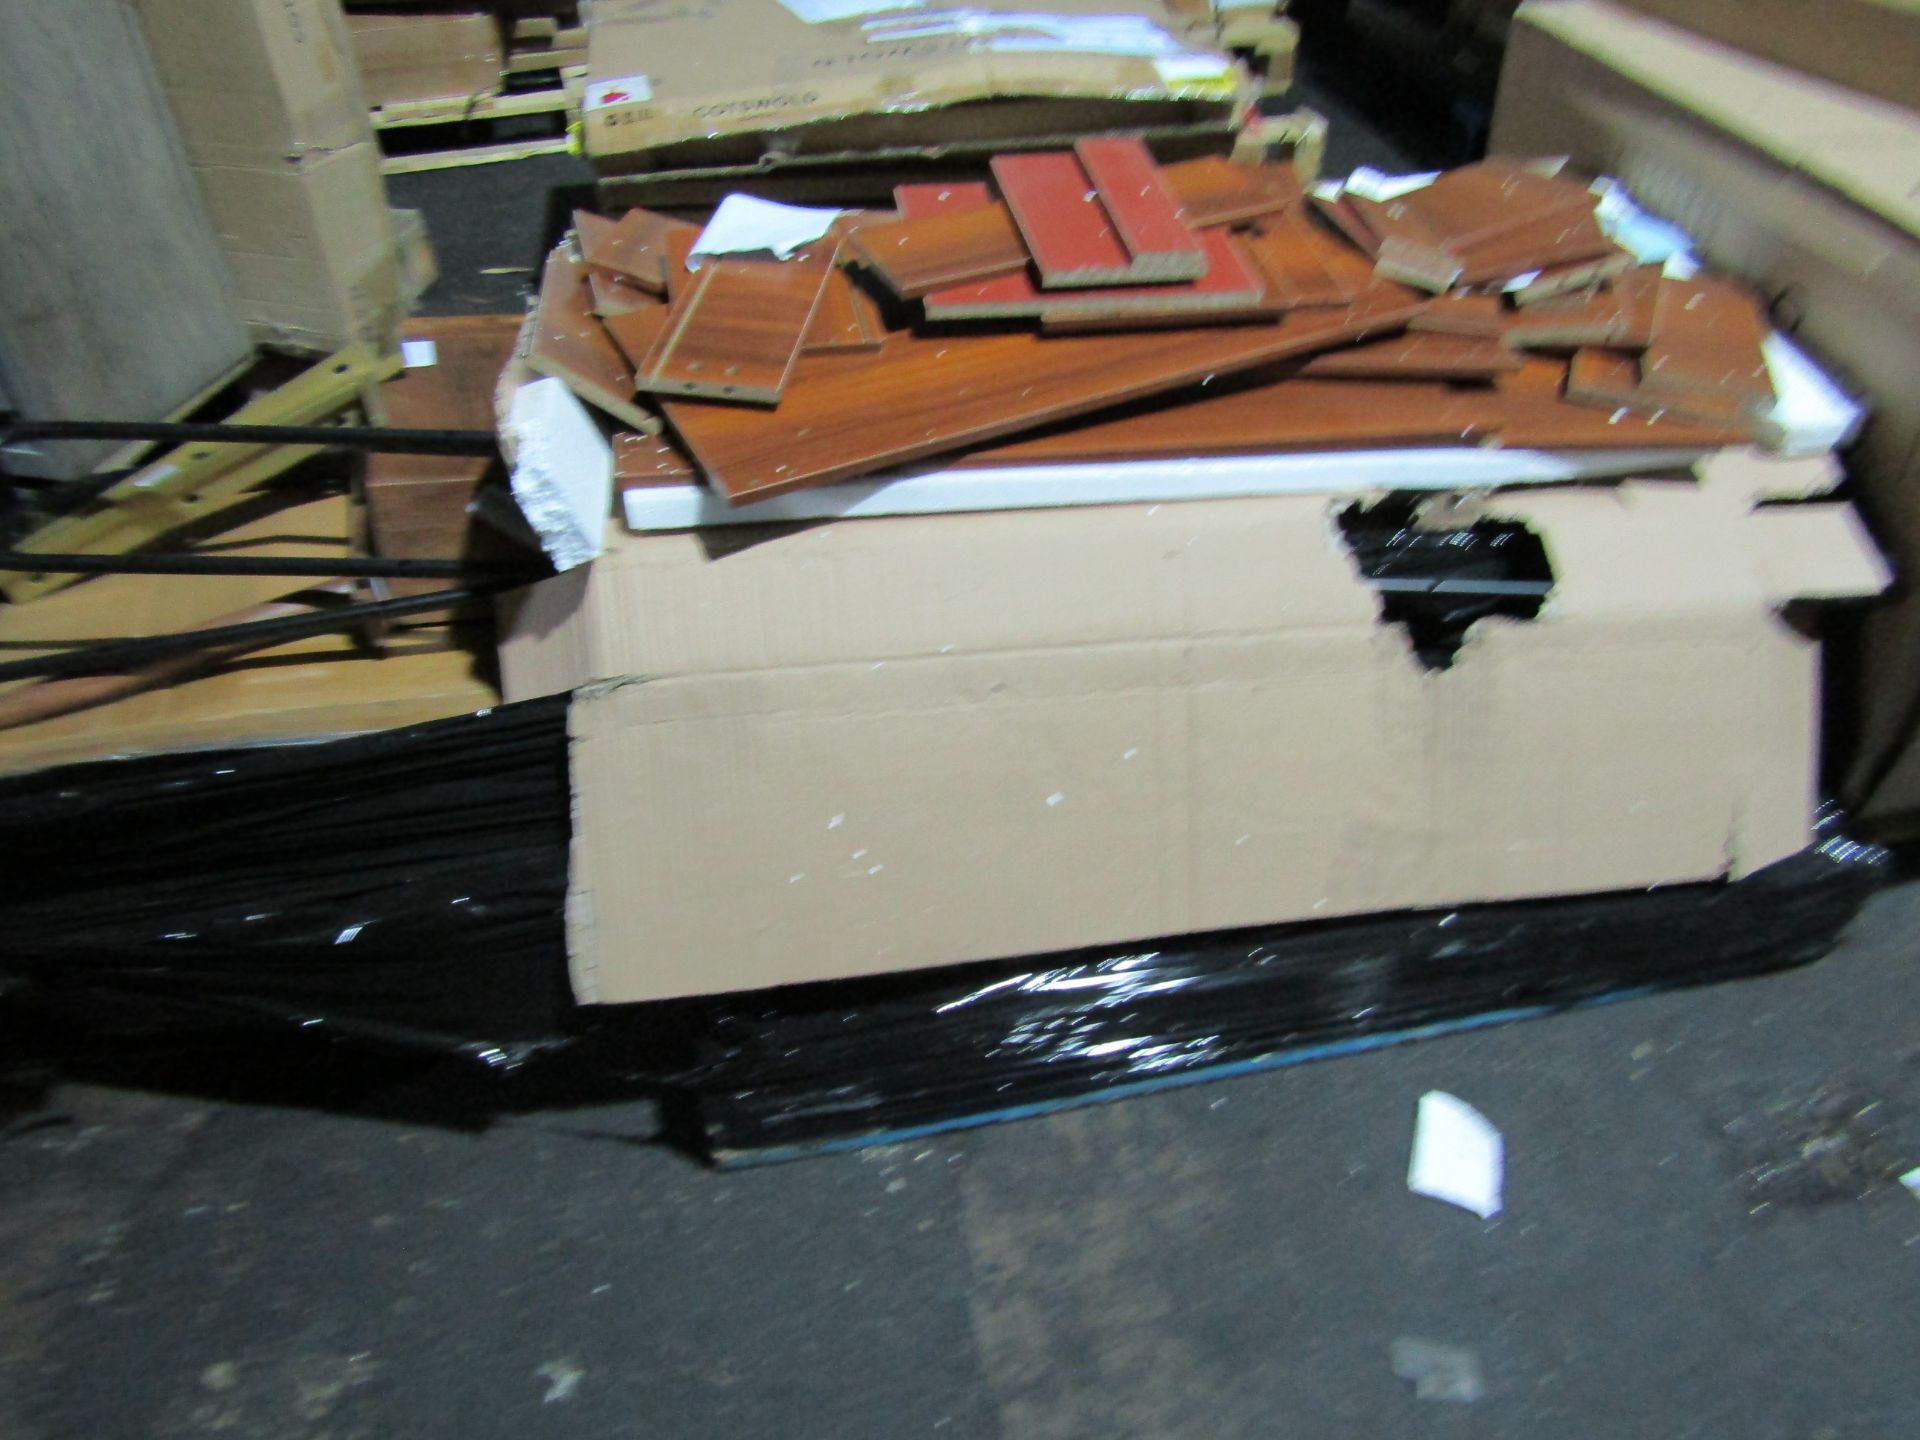 Pallet of various Furniture items. All unmanifested and unchecked